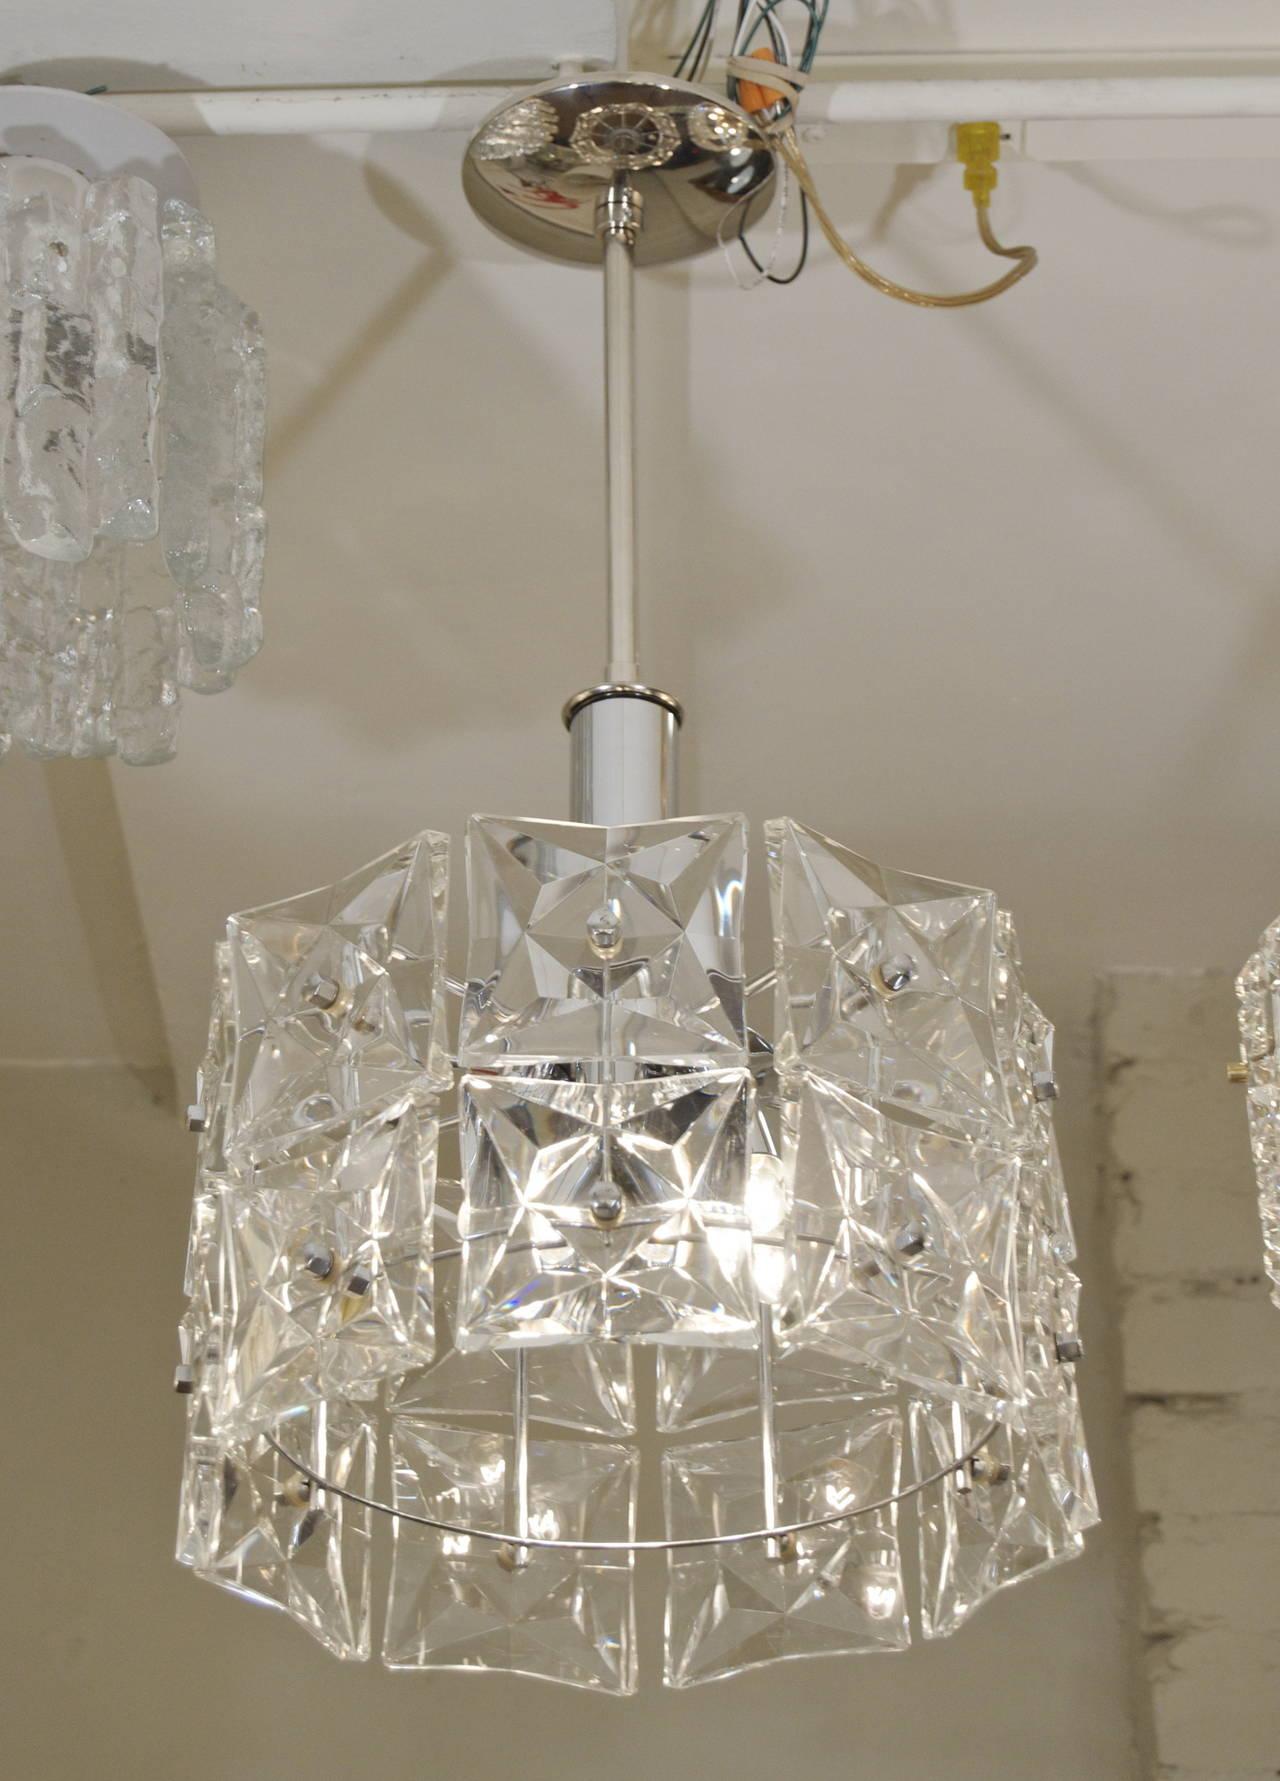 German Dramatic Two-Tier Kinkeldey Chandelier with Square Crystals